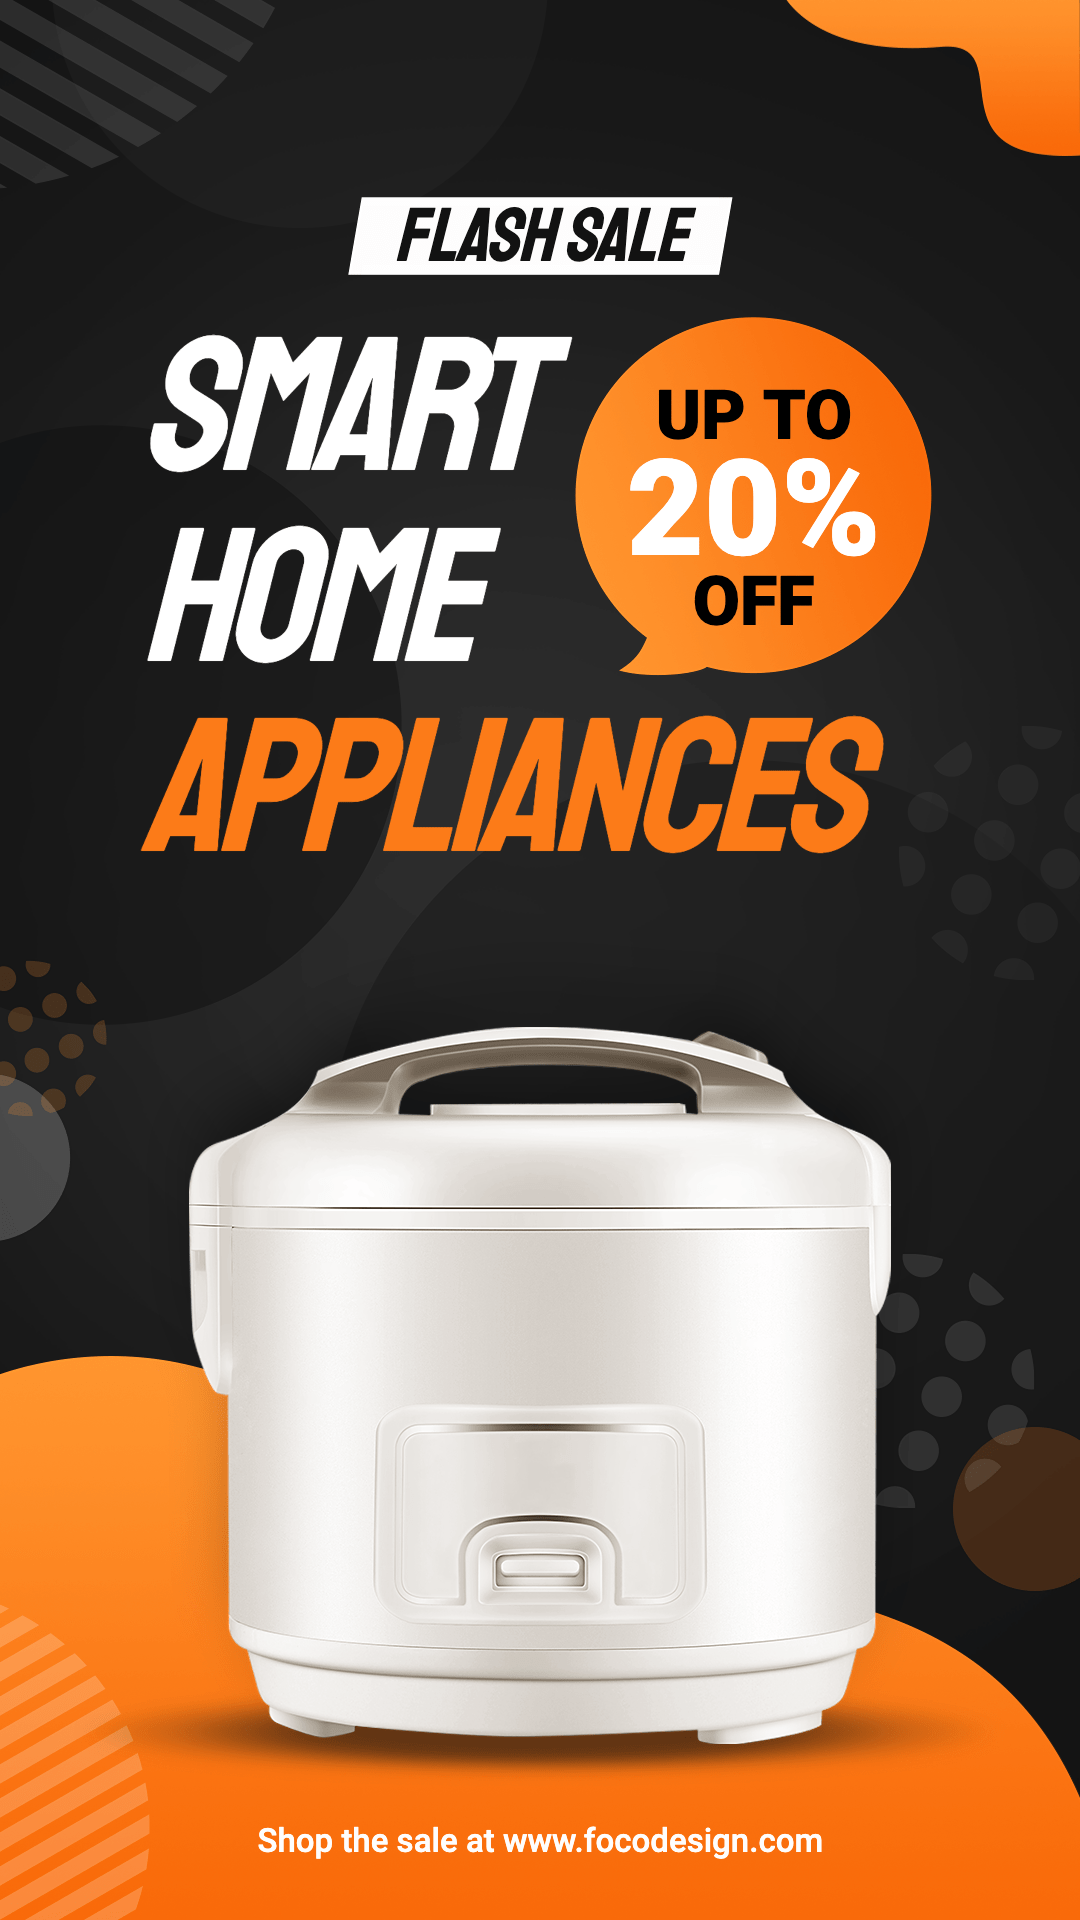 Rice Cooker Kitchenware Cookware Home Electronic Appliance Sale Promo Ecommerce Story预览效果